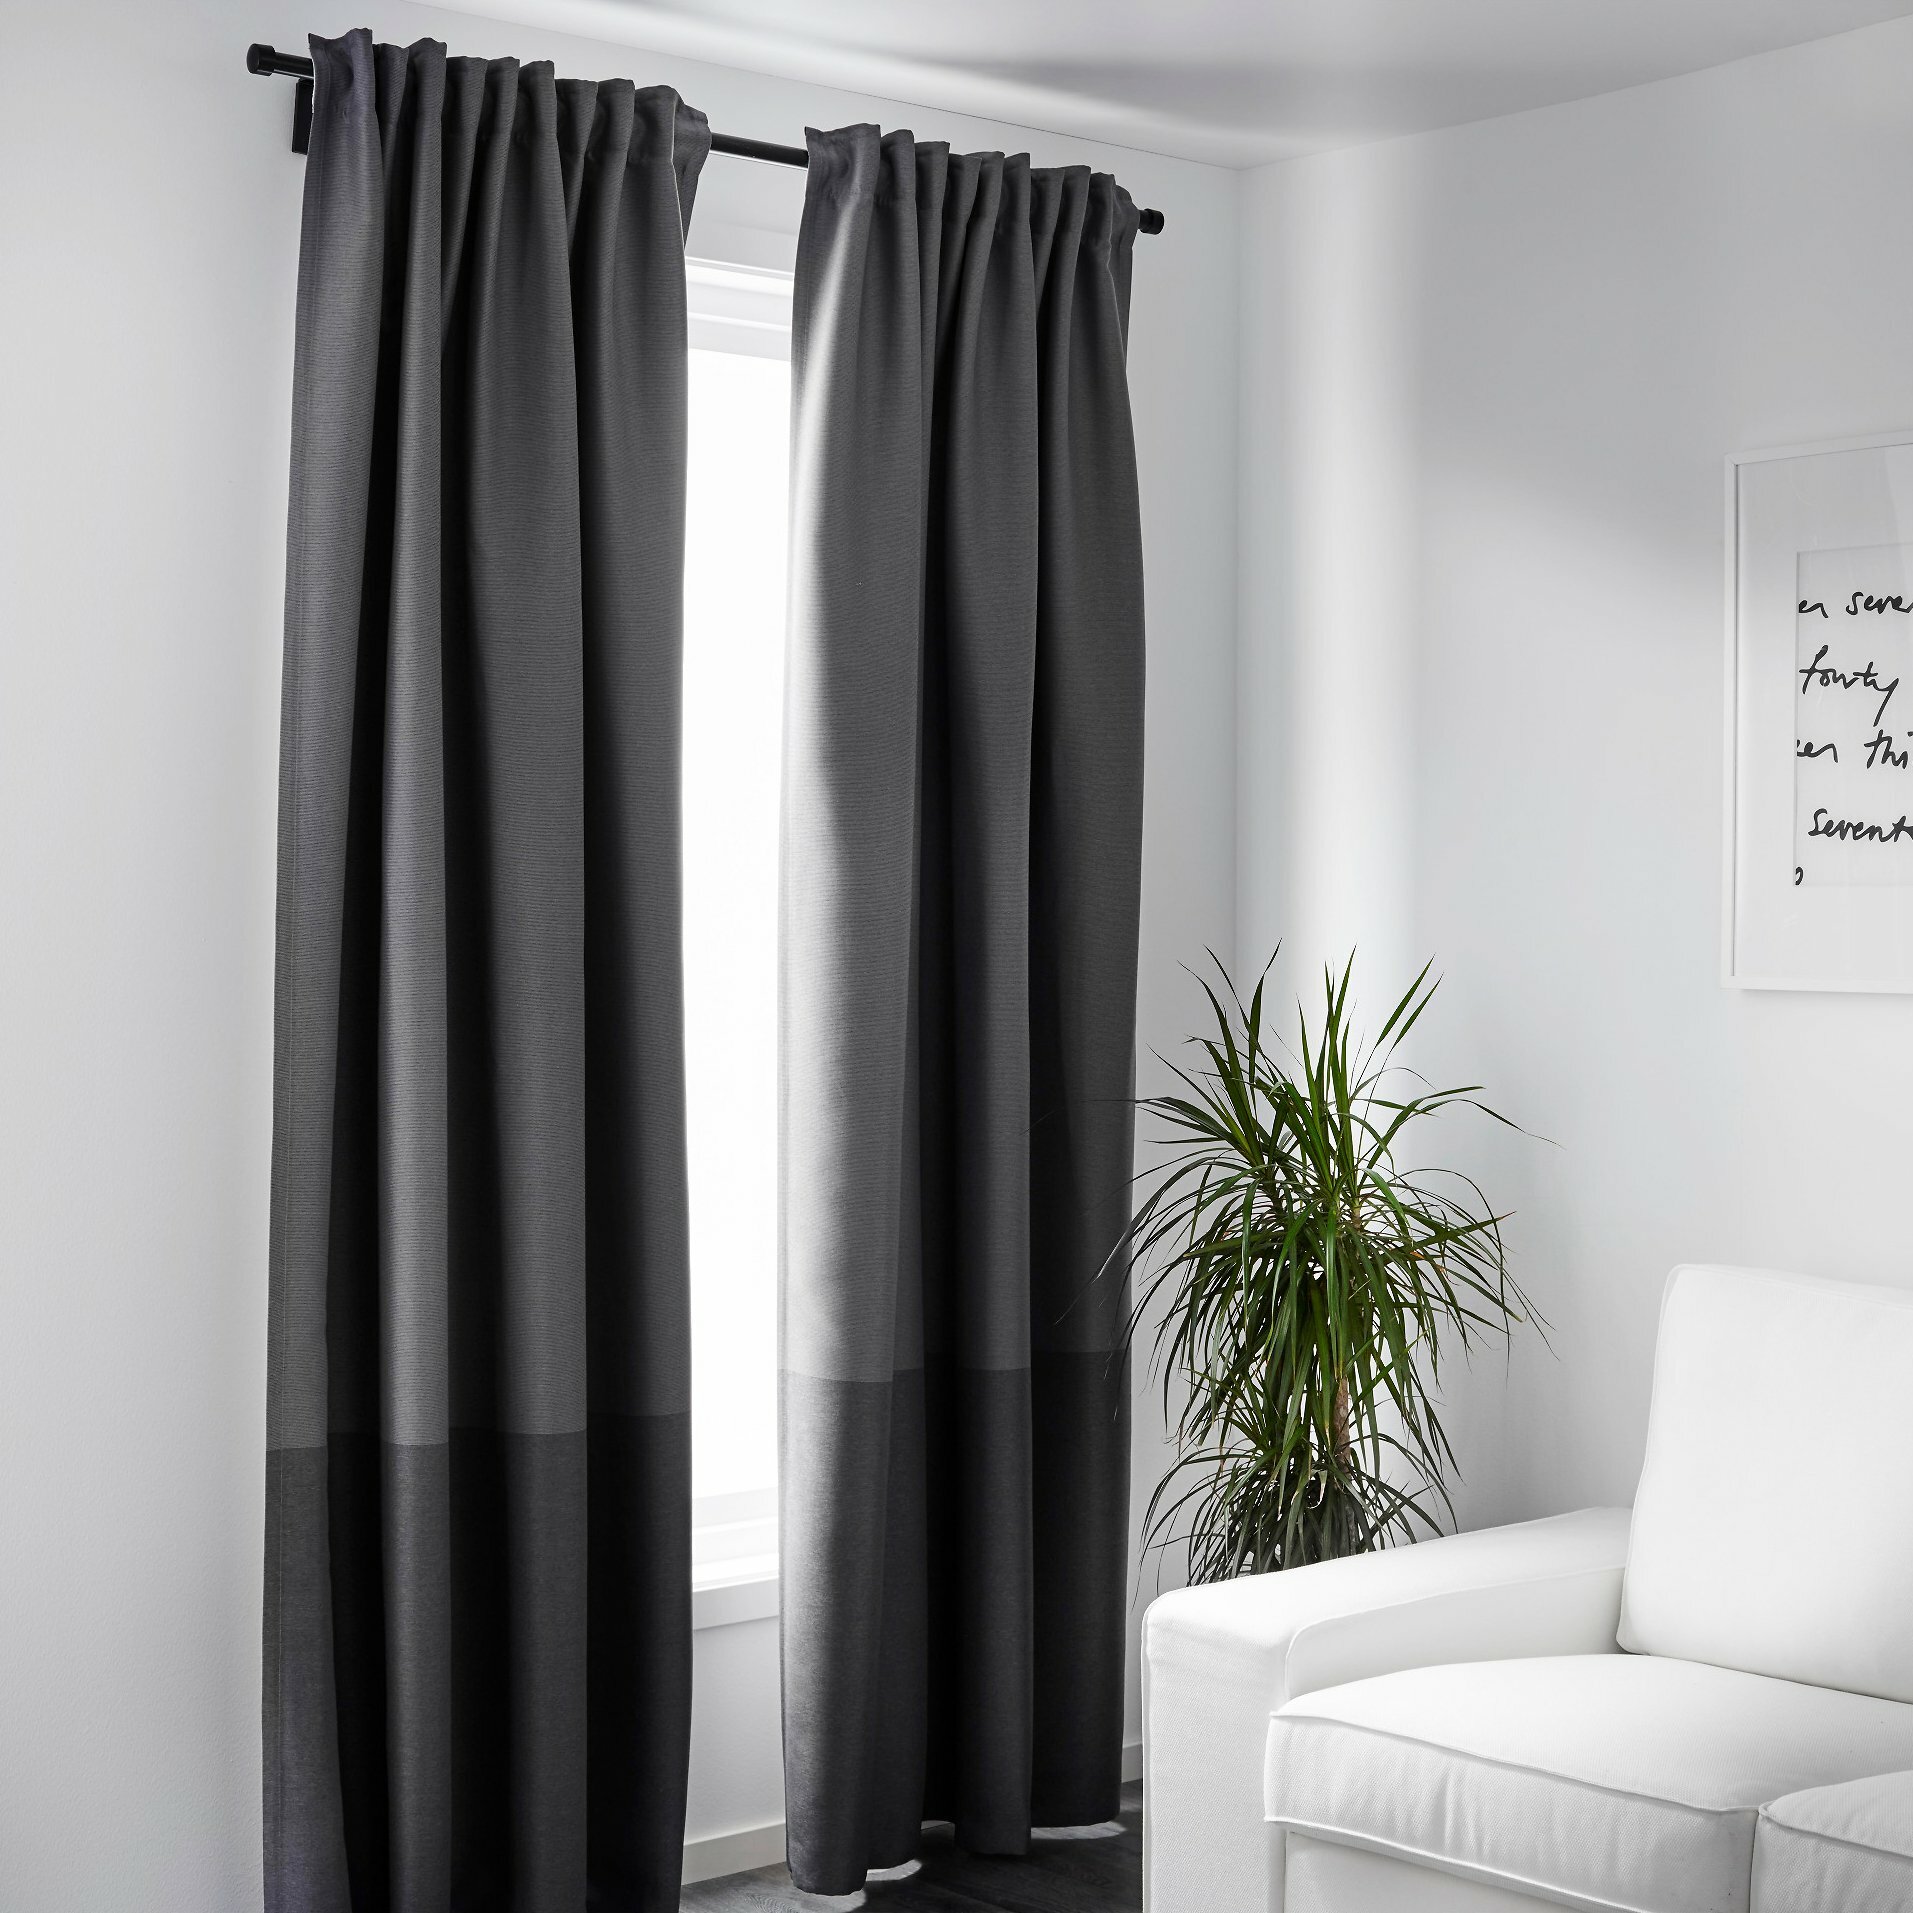 Cheap Blackout Curtains | Black and White Blackout Curtains | Short Blackout Curtains